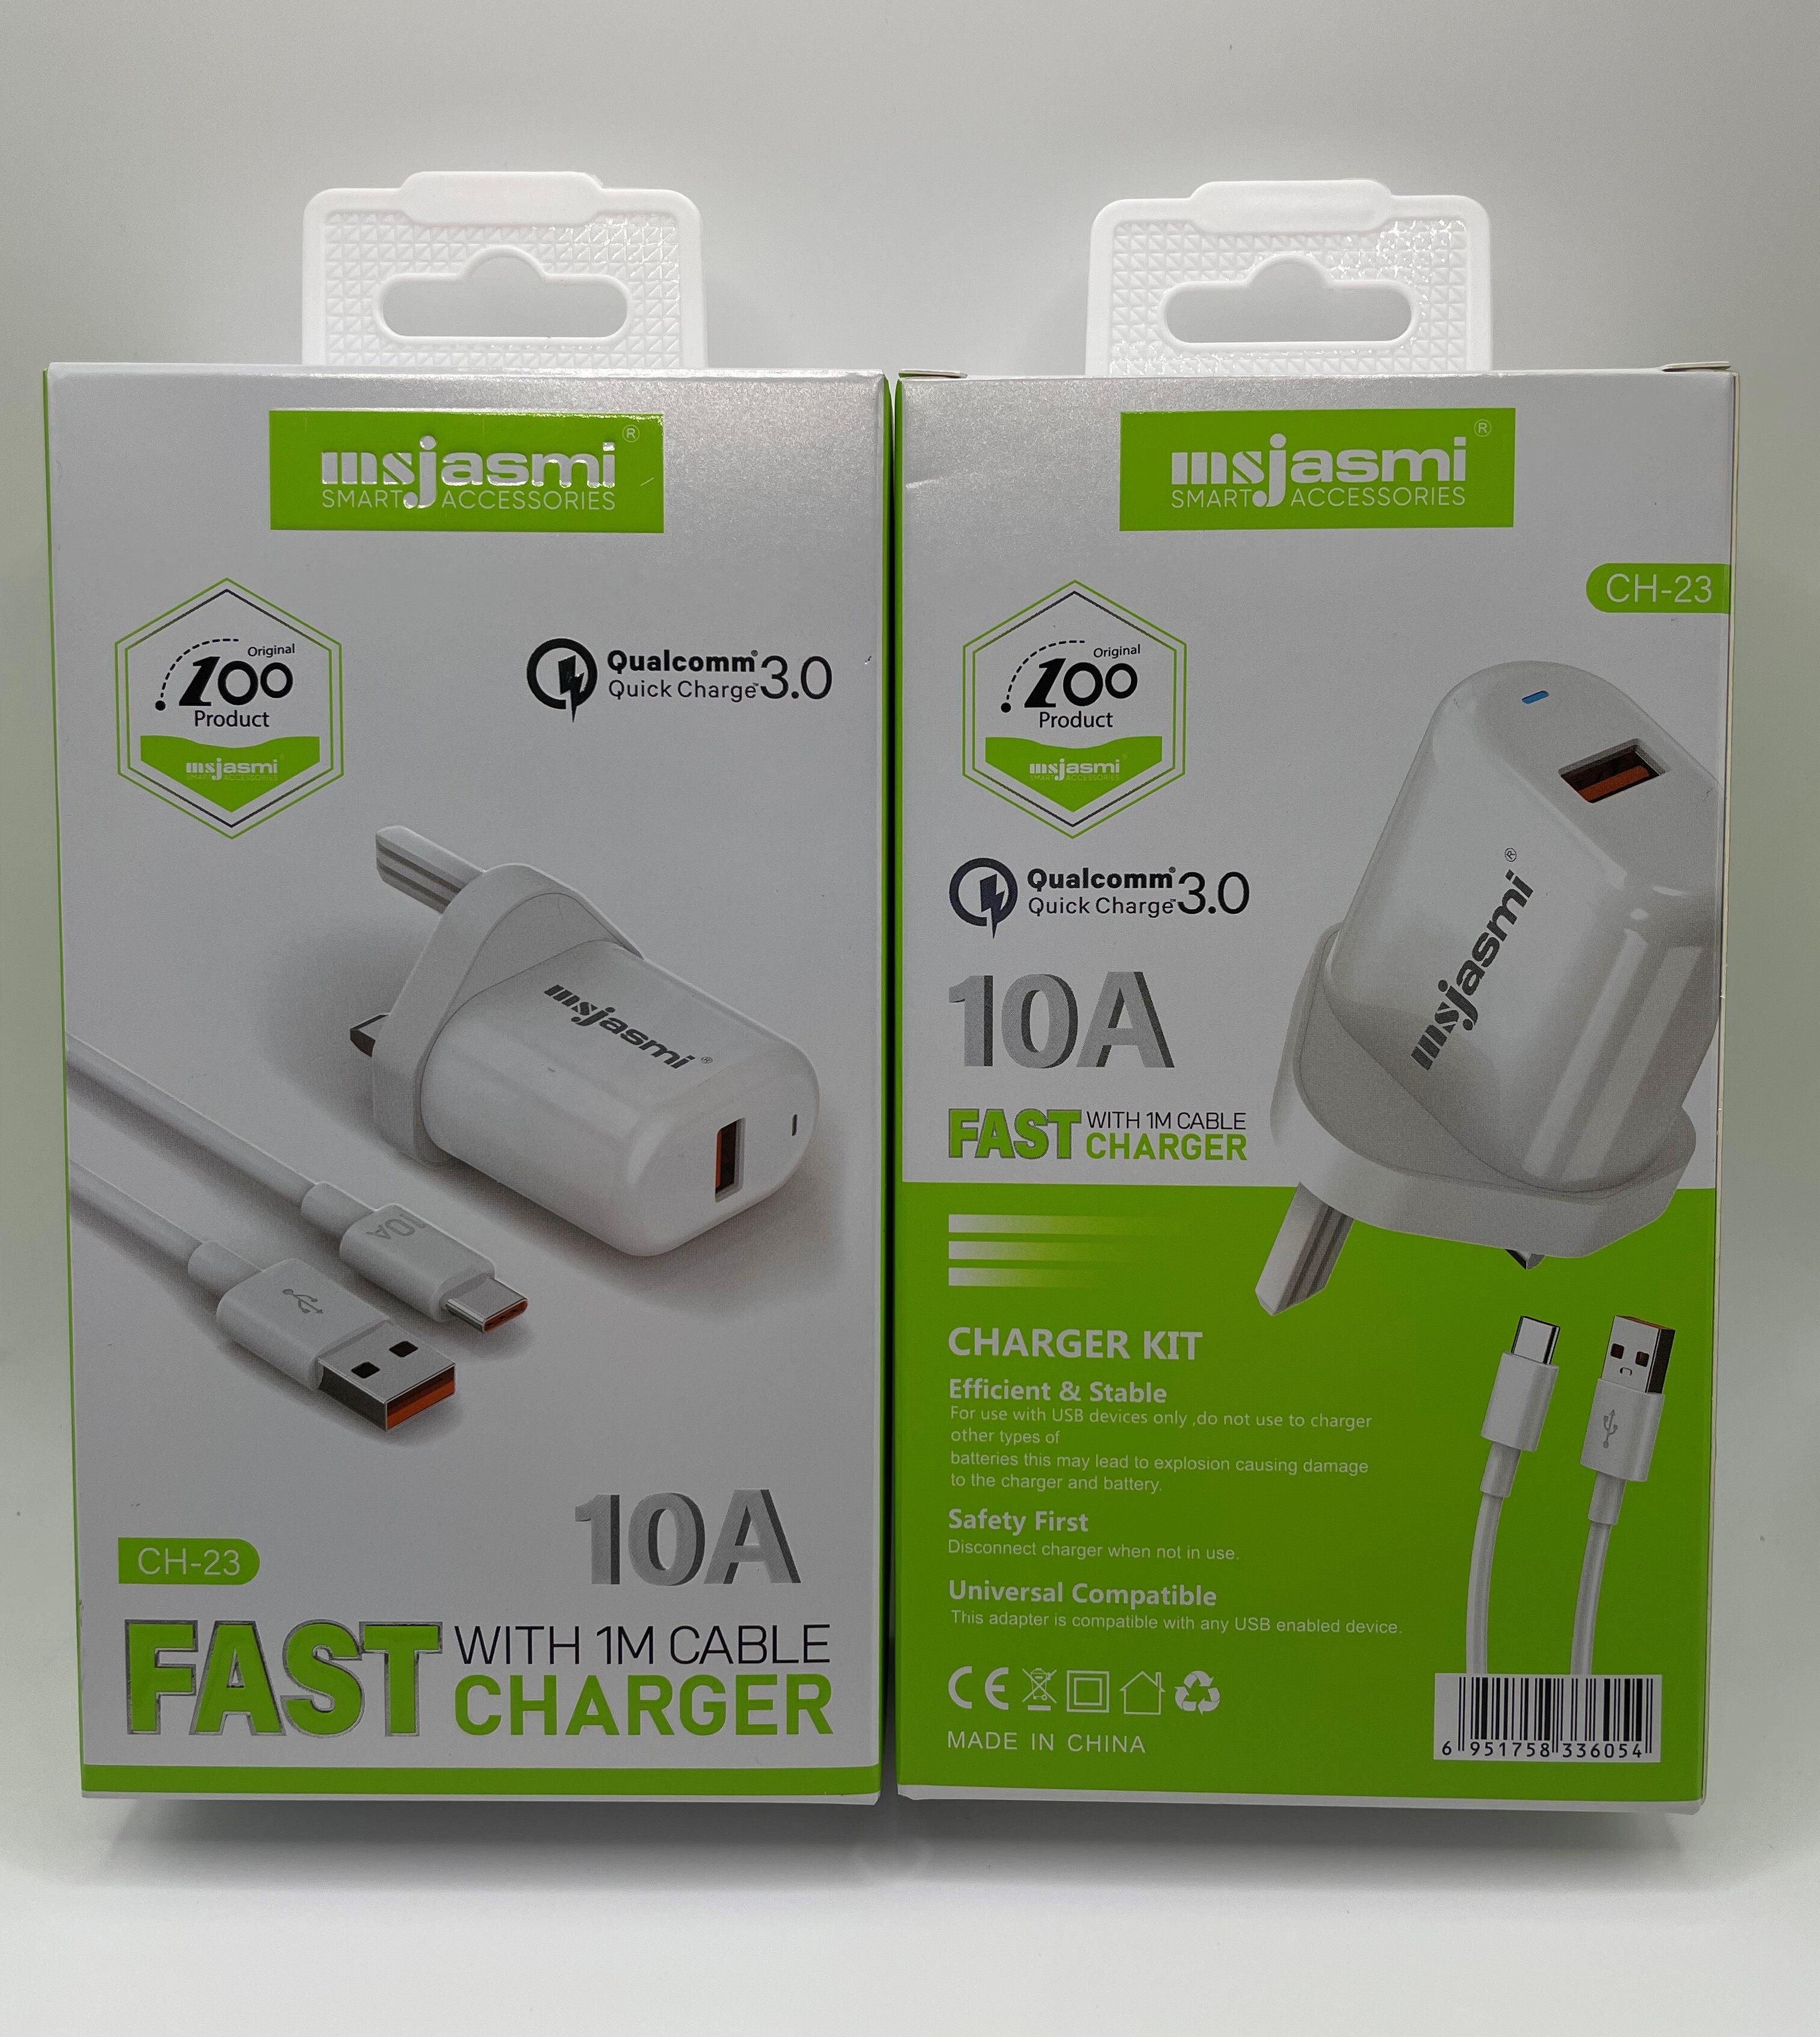 qc3.0 fast chargers with 10A type c cables complete